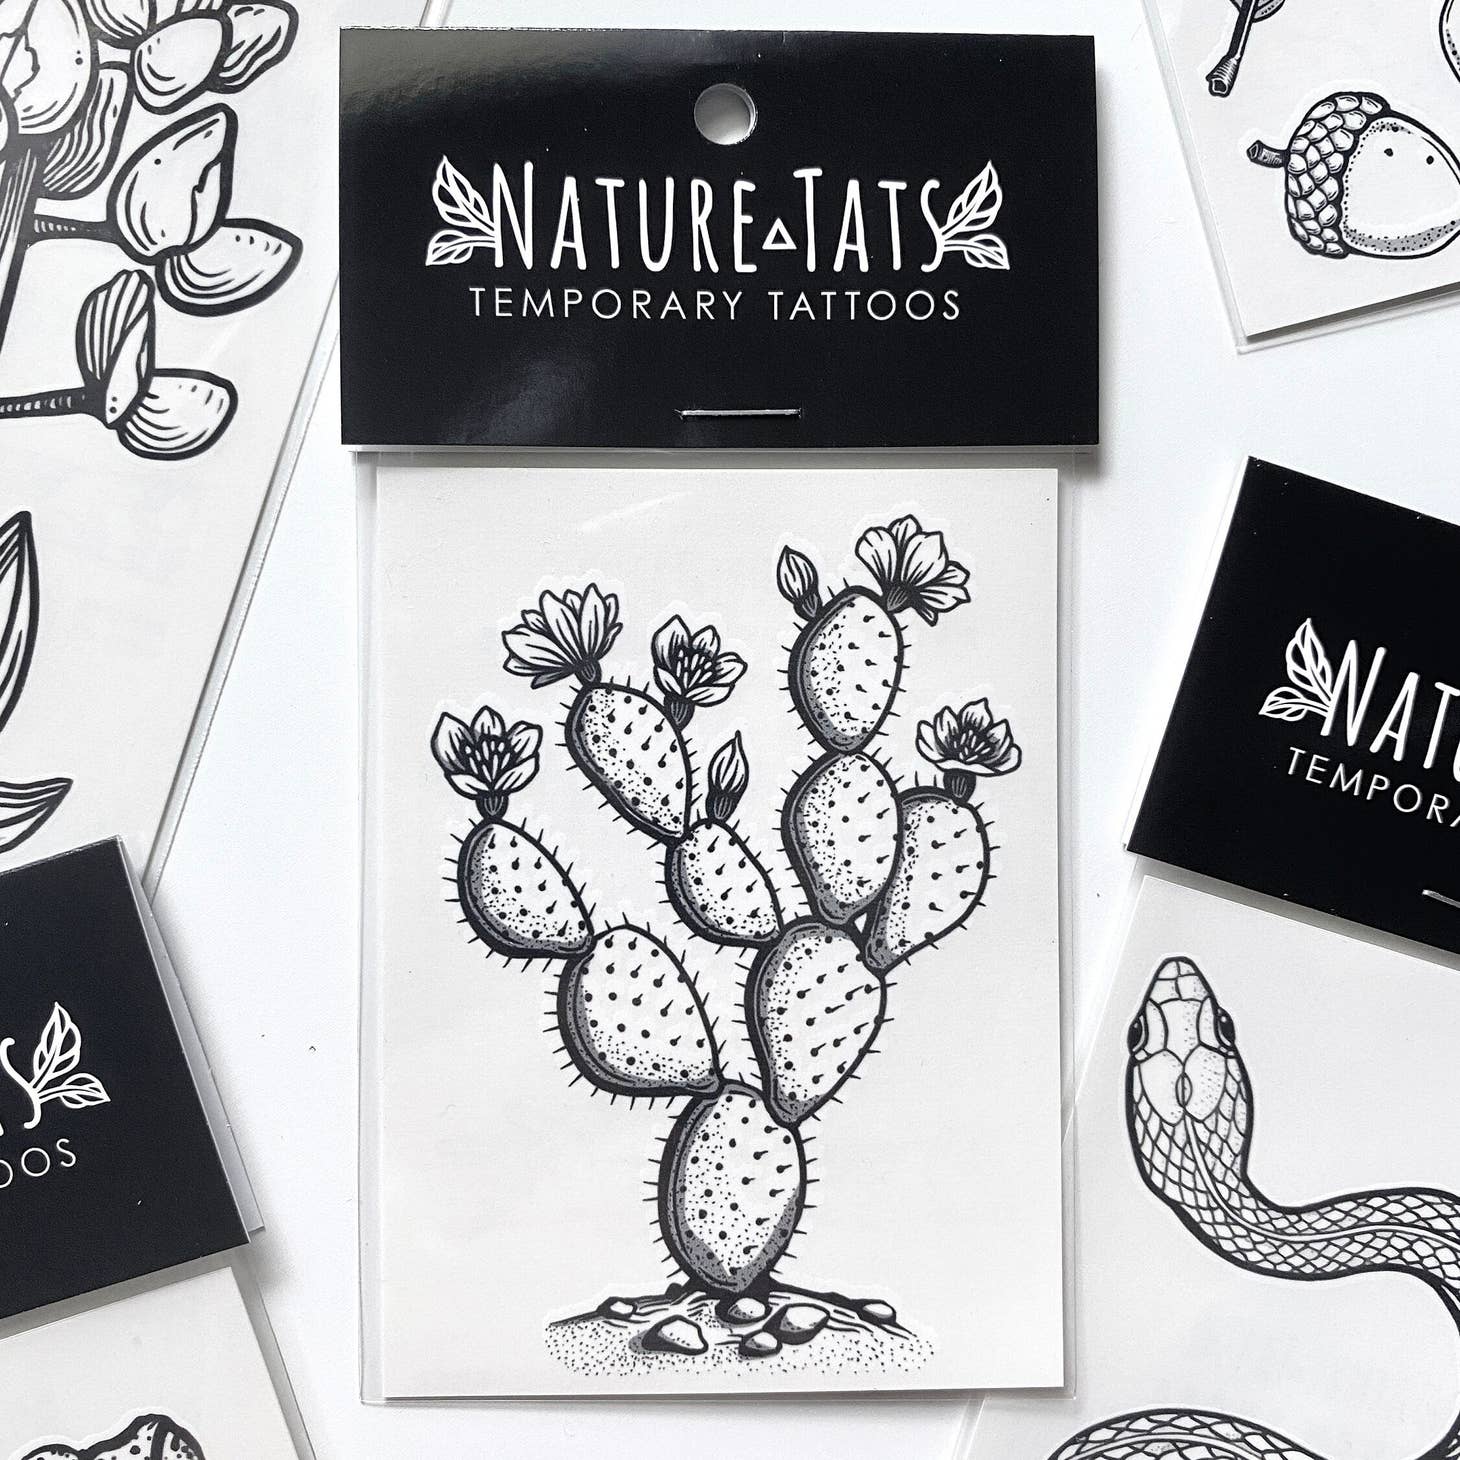 Tattoos By Jake B on Tumblr: Prickly Pear Cactus